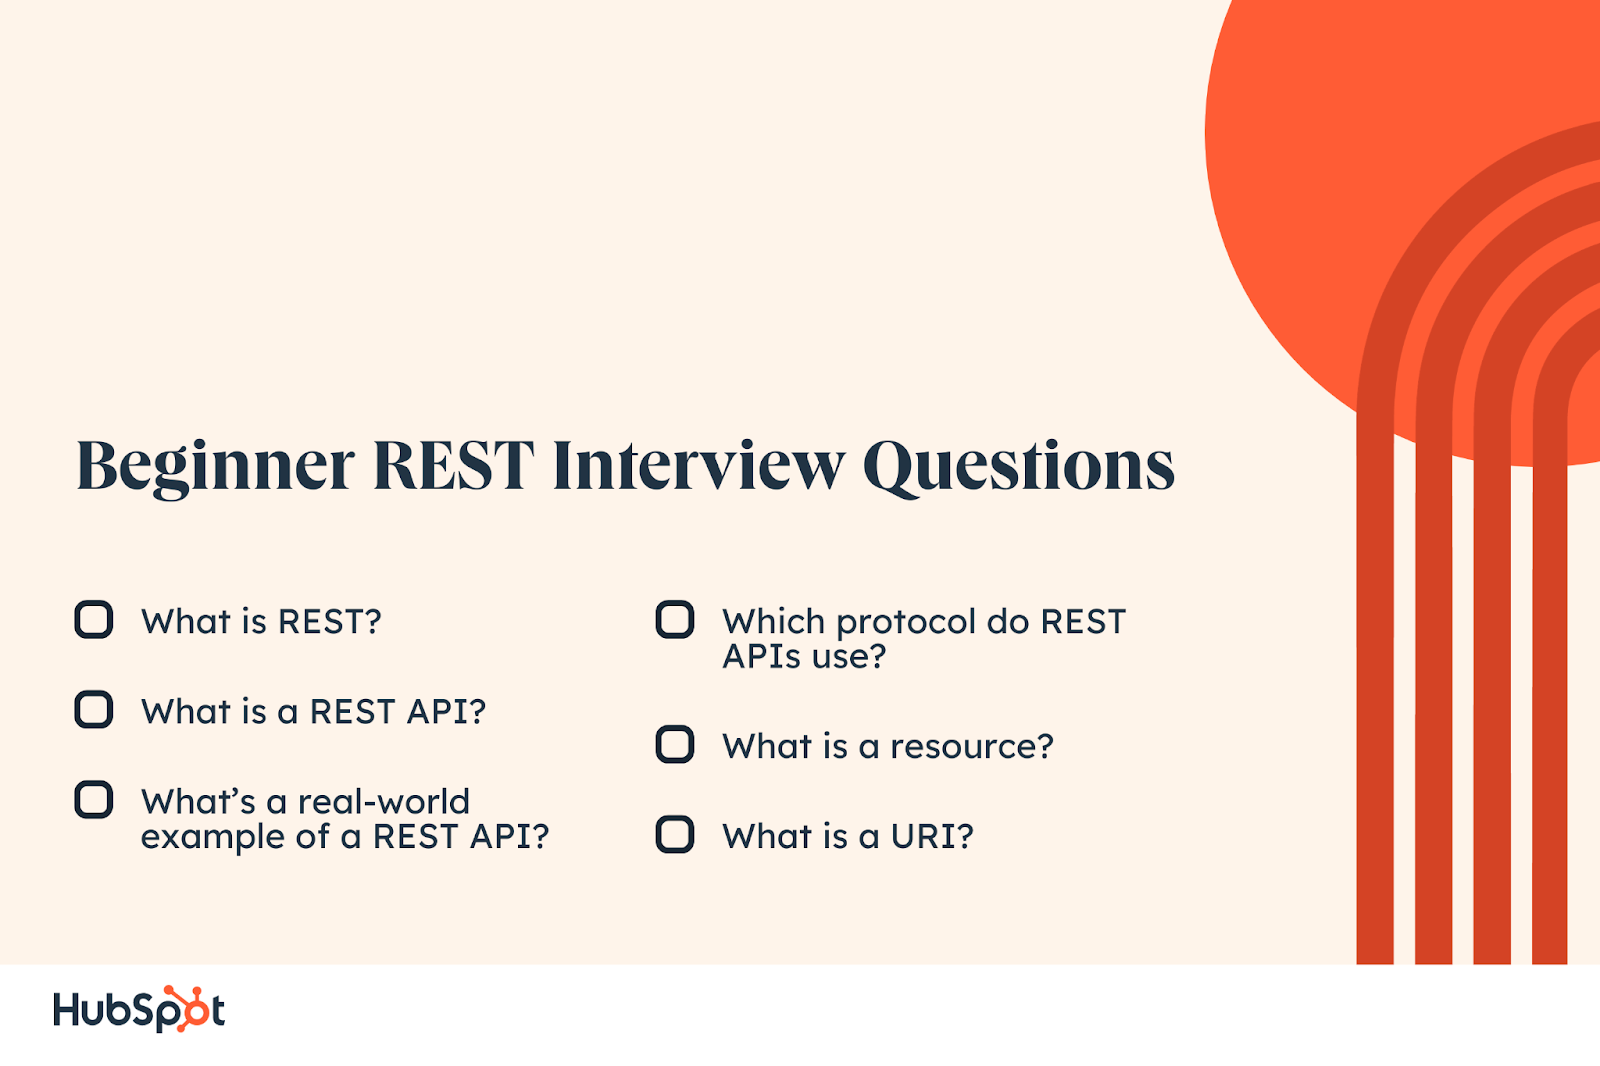 Intermediate REST Interview Questions. What is messaging in the context of REST? Which HTTP request methods are supported by REST? What is CRUD? What are the main parts of an HTTP request? What are the main parts of an HTTP response? What are some common HTTP response status codes you might see when working with a REST API? Which markup languages are primarily used to represent resources in REST APIs? What are the principles of REST? What does it mean for an API to be stateless? What is caching? What is payload? What are some benefits of REST? What is the difference between REST and AJAX?